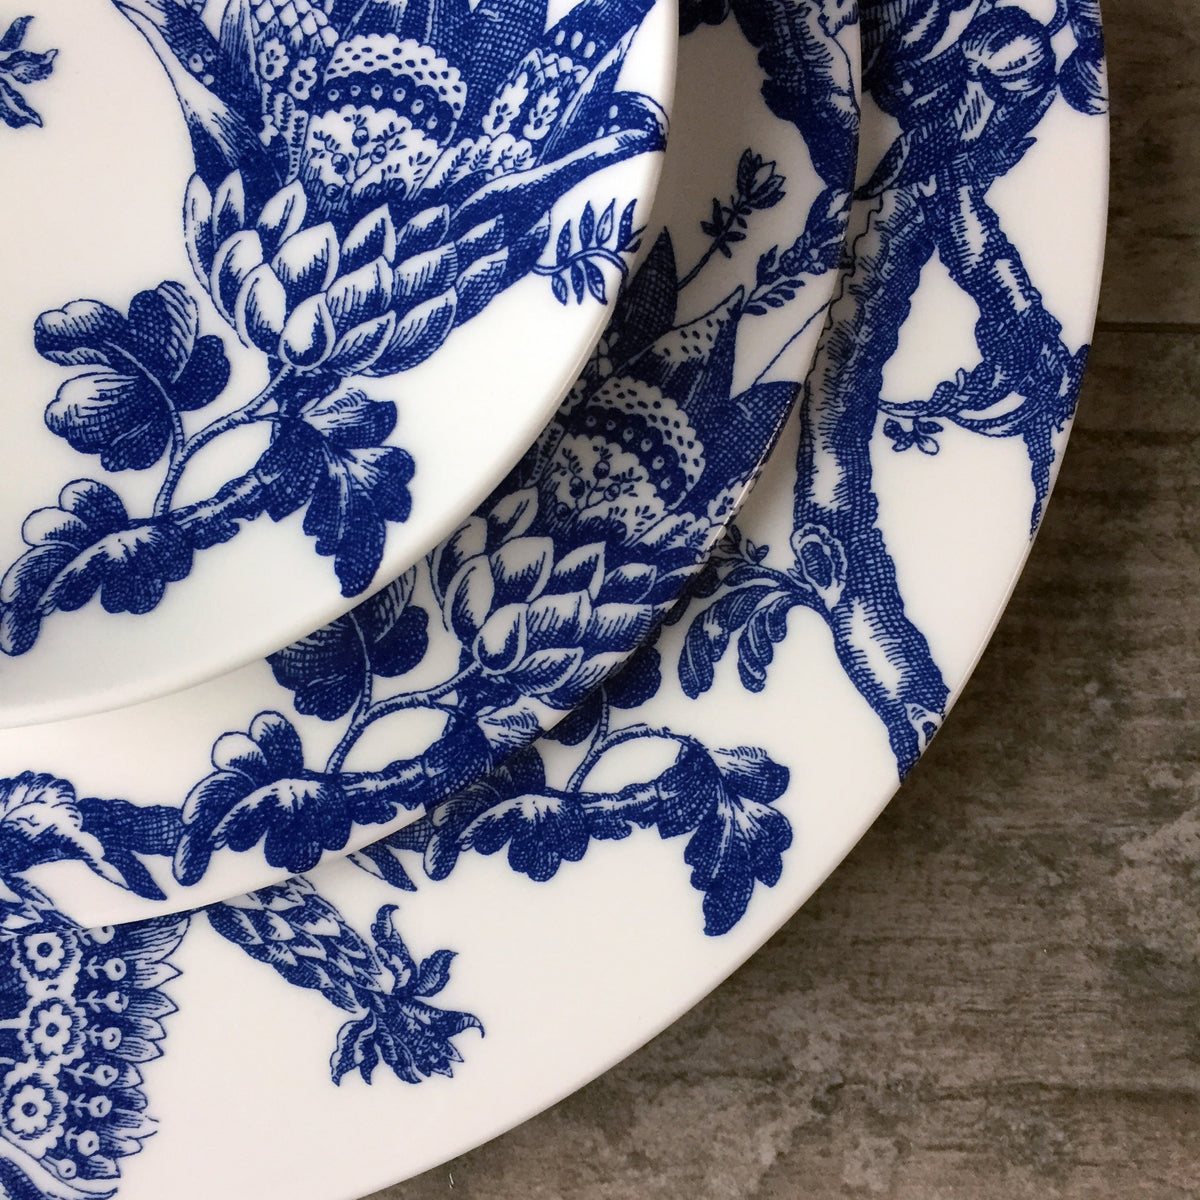 A close up of Arcadia Dinnerware from Caskata showcases the intricate blue and white design.